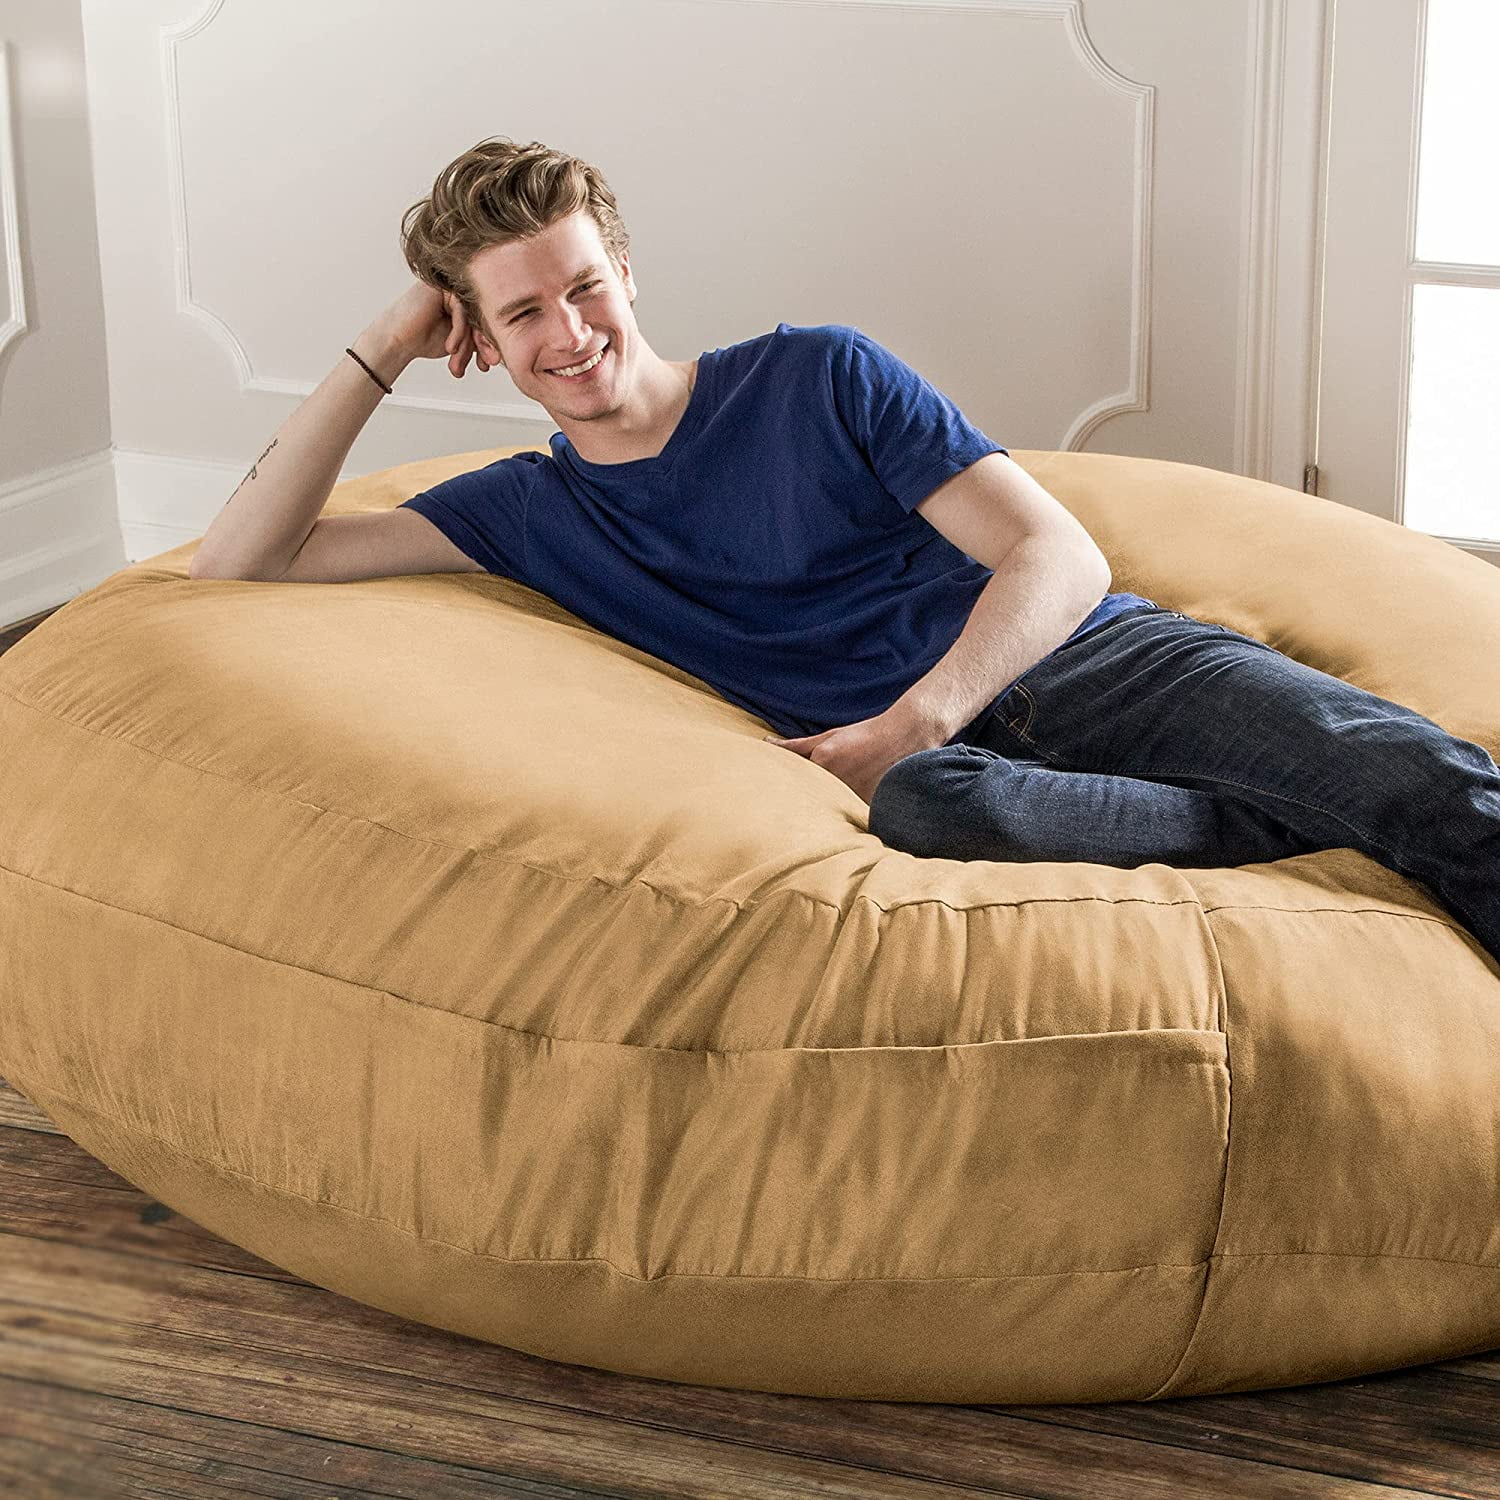 Jaxx Cocoon 6 Ft Giant Bean Bag Sofa and Lounger for Adults, Microsuede -  On Sale - Bed Bath & Beyond - 6300627